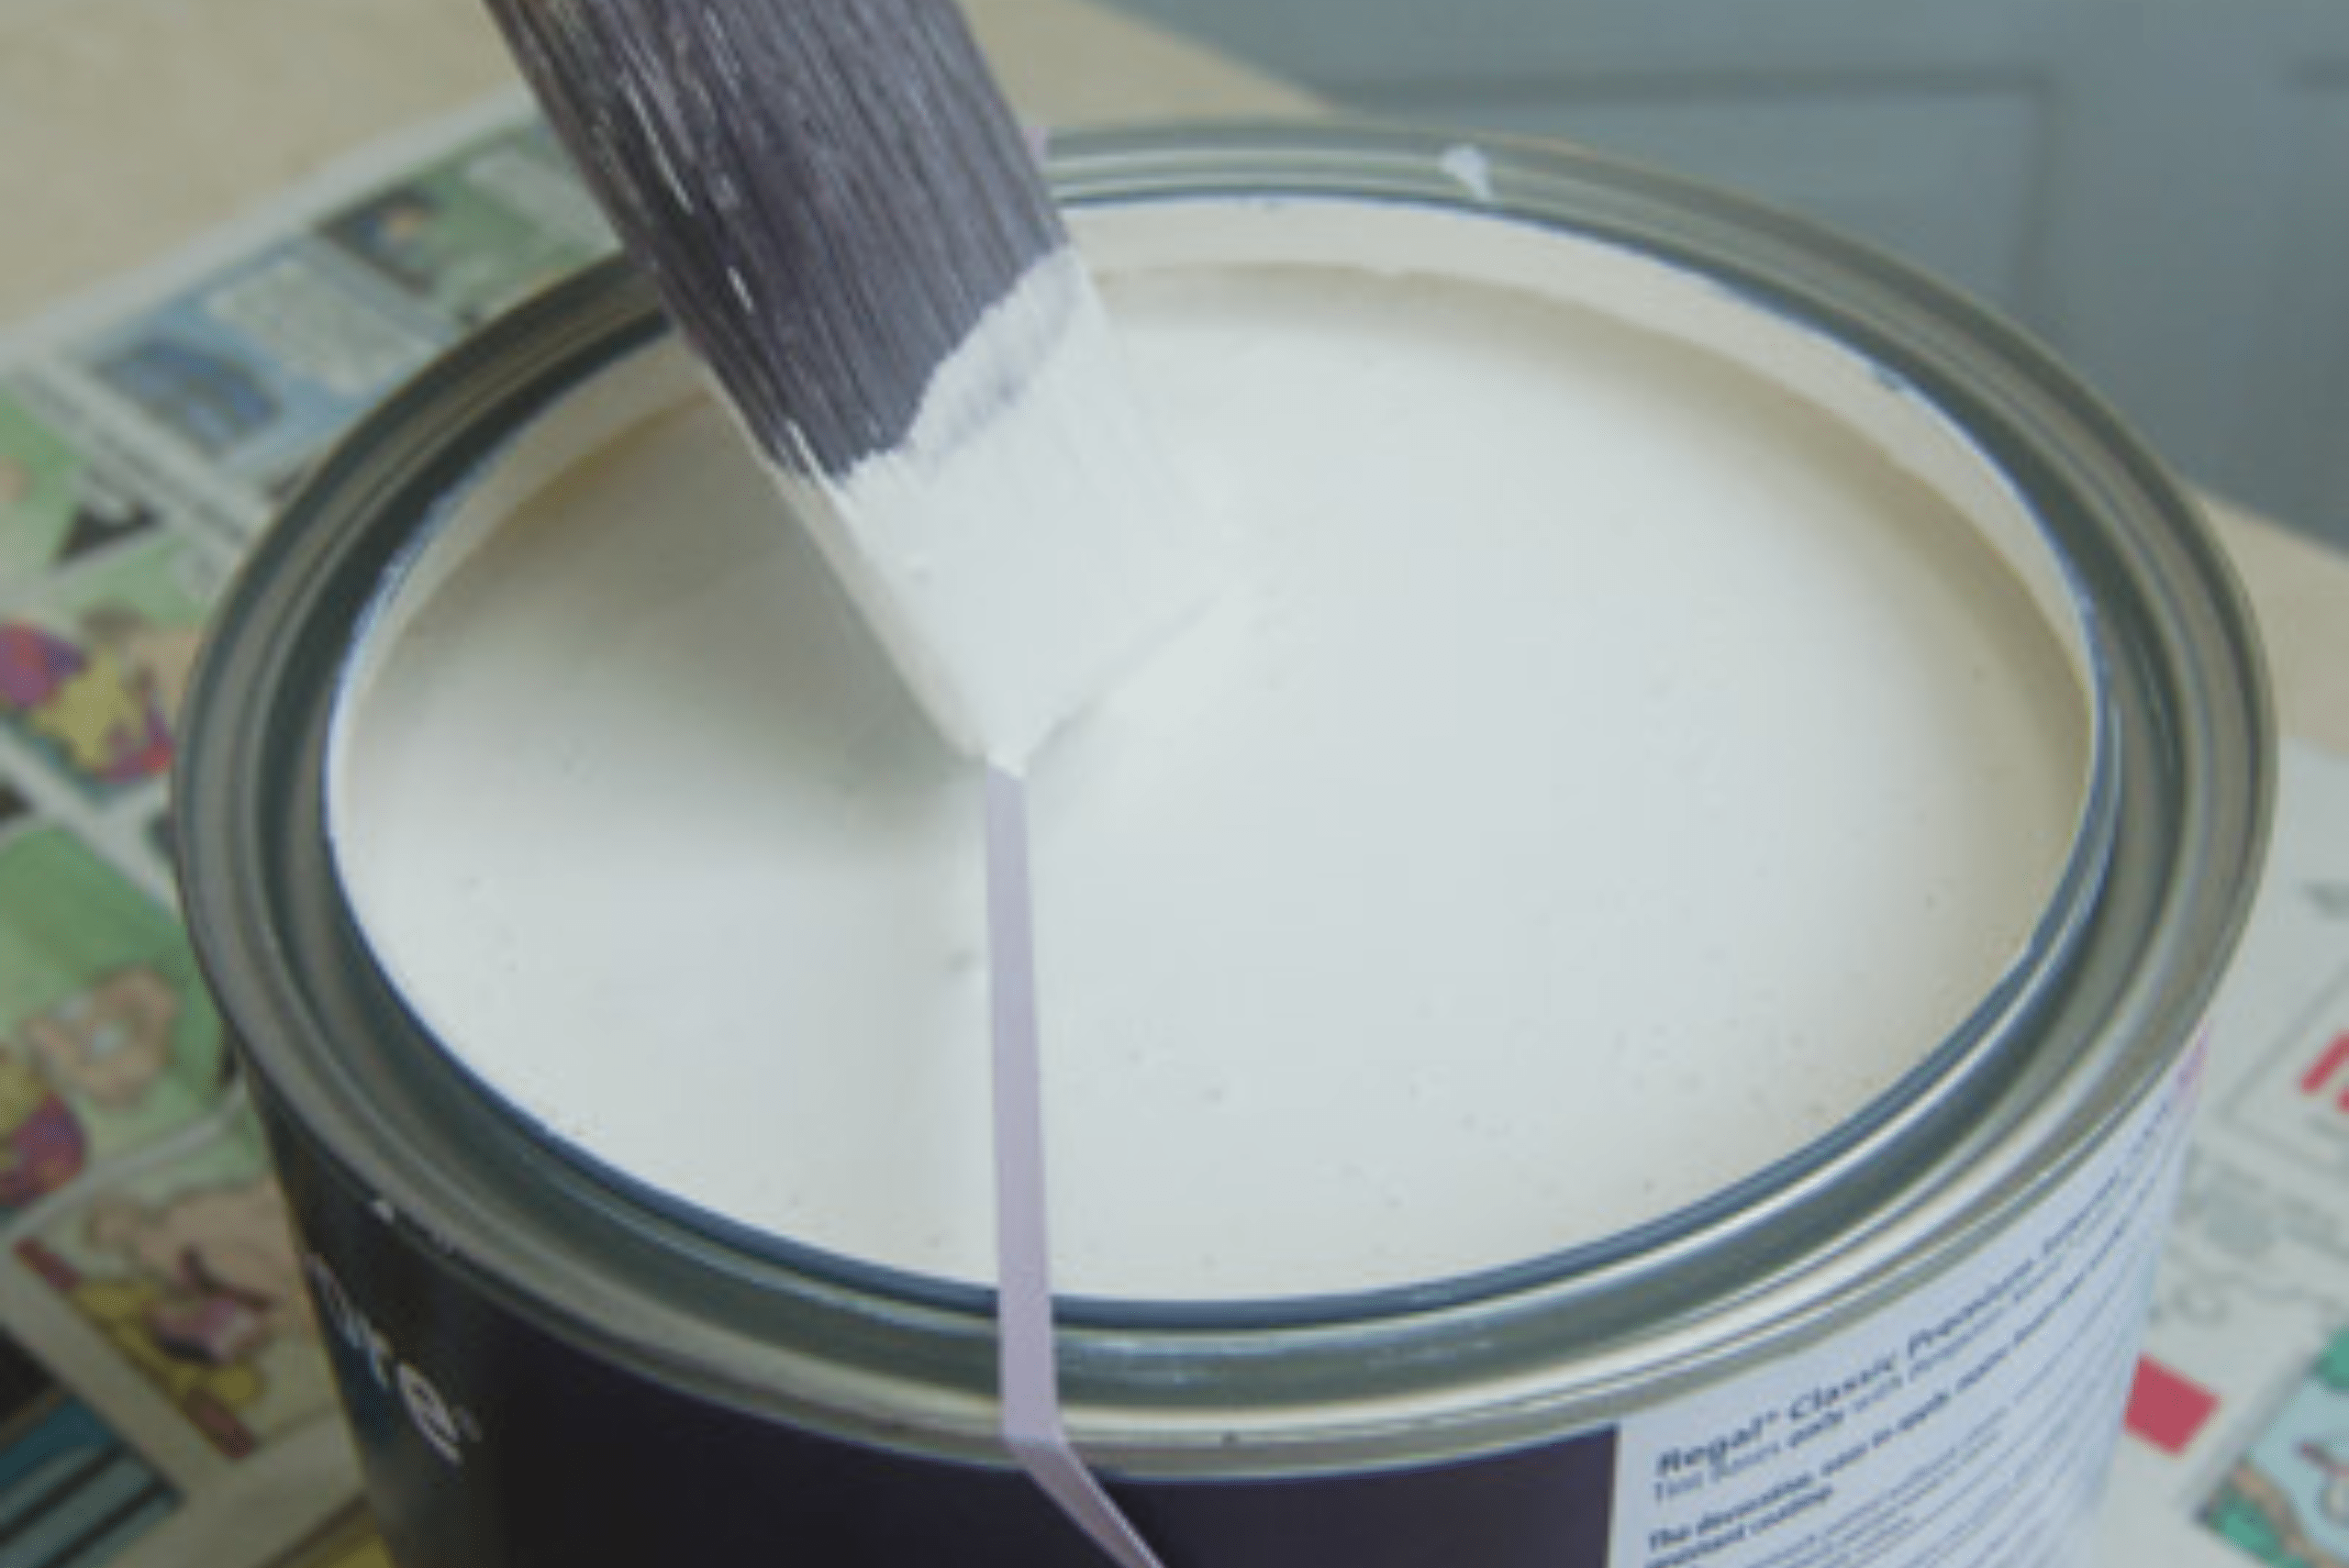 Brush being wiped on a rubber band mounted onto paint can.